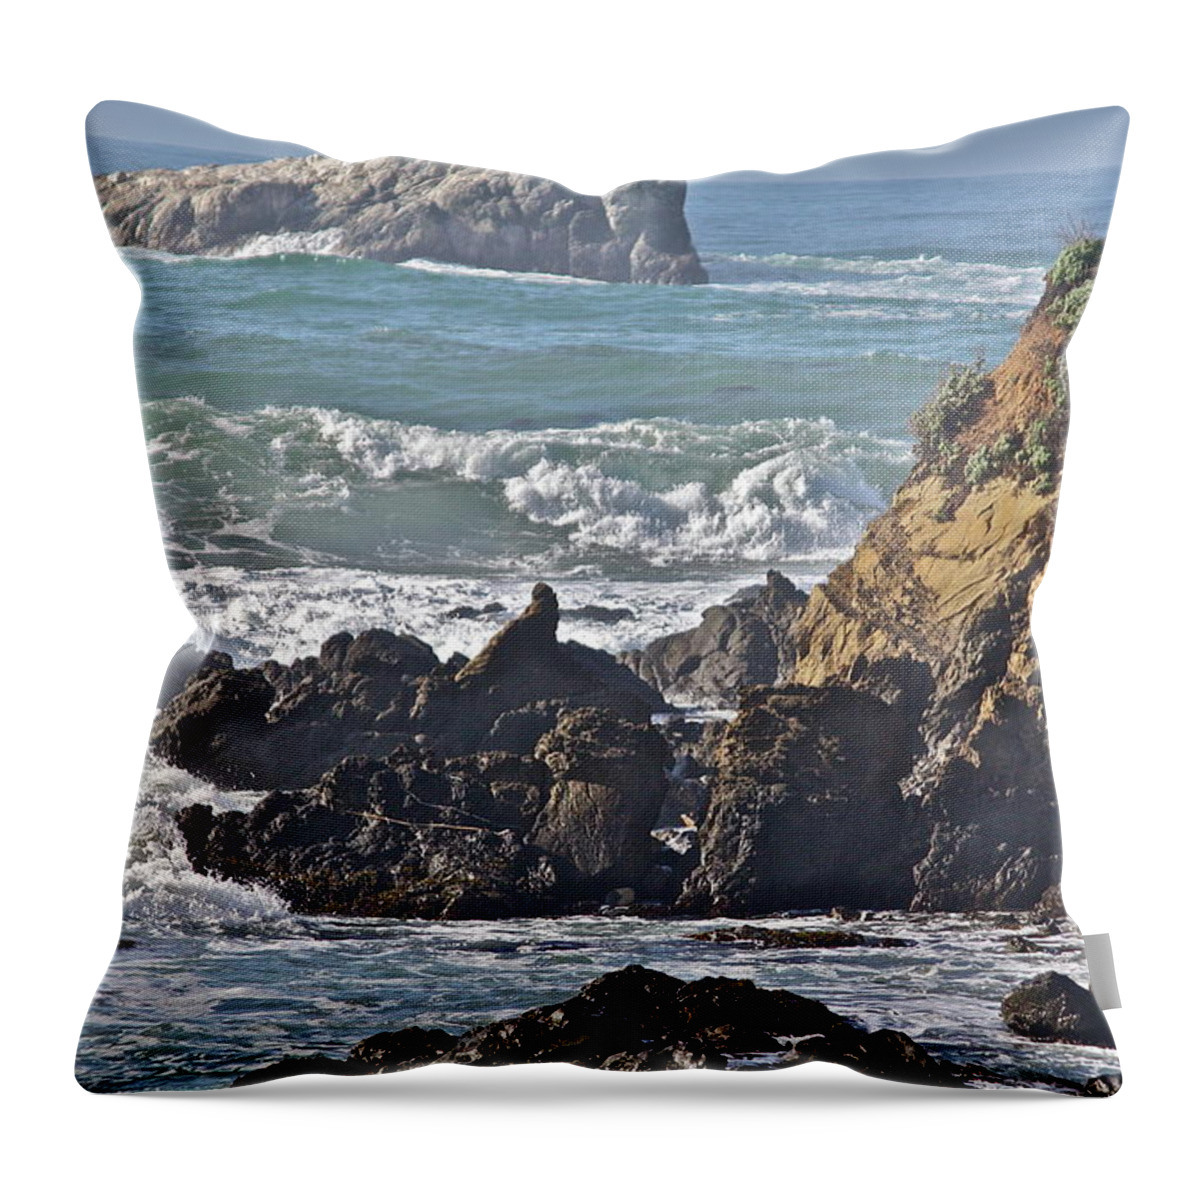 Sea Throw Pillow featuring the photograph Rocky Coast by Diana Hatcher